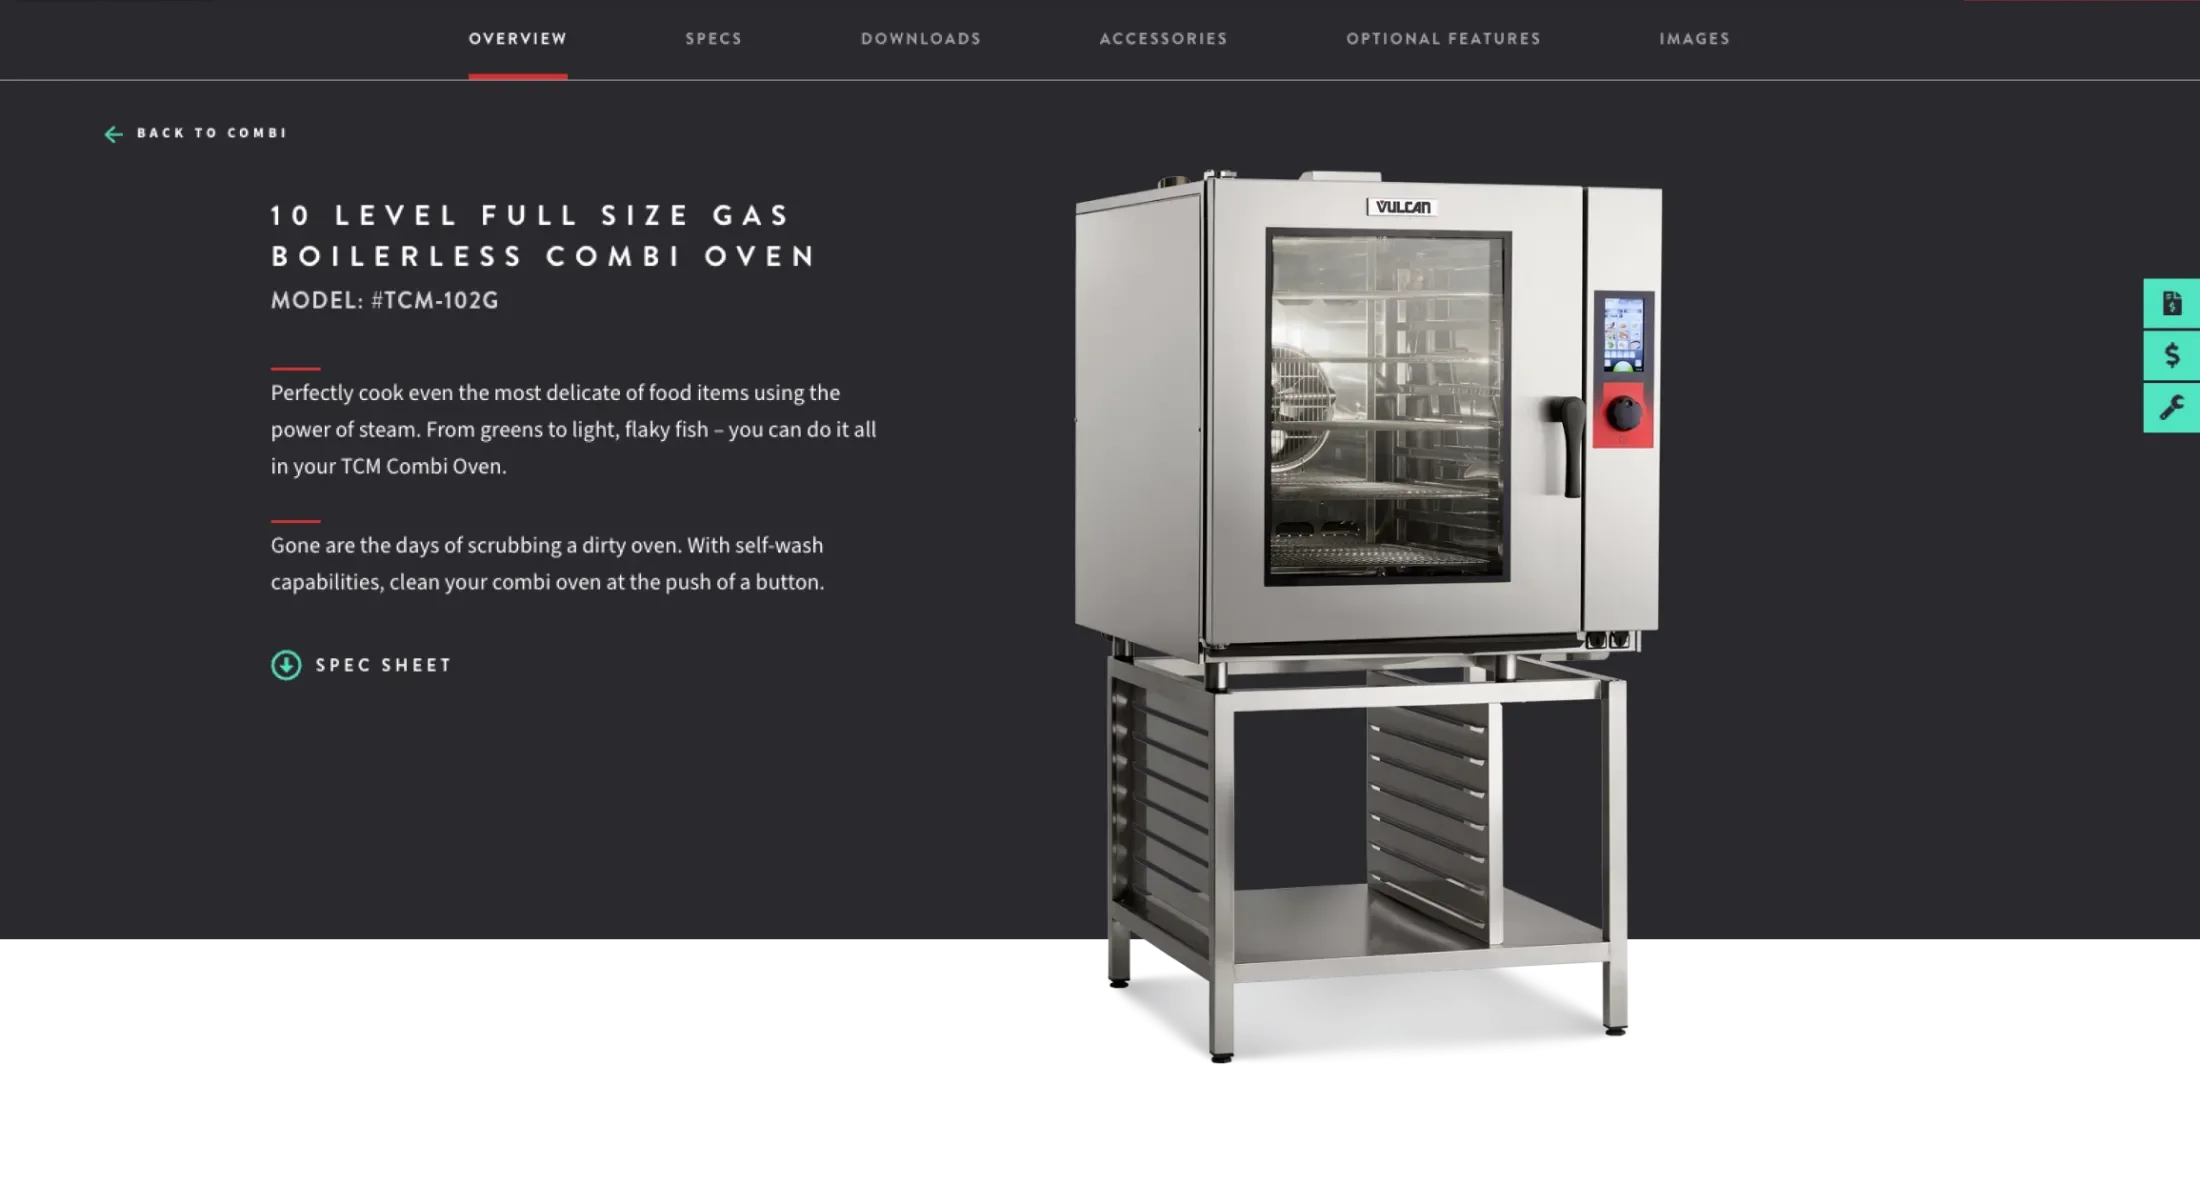 Product page for a 10 Level Full Size Gas Broilerless Combi Oven